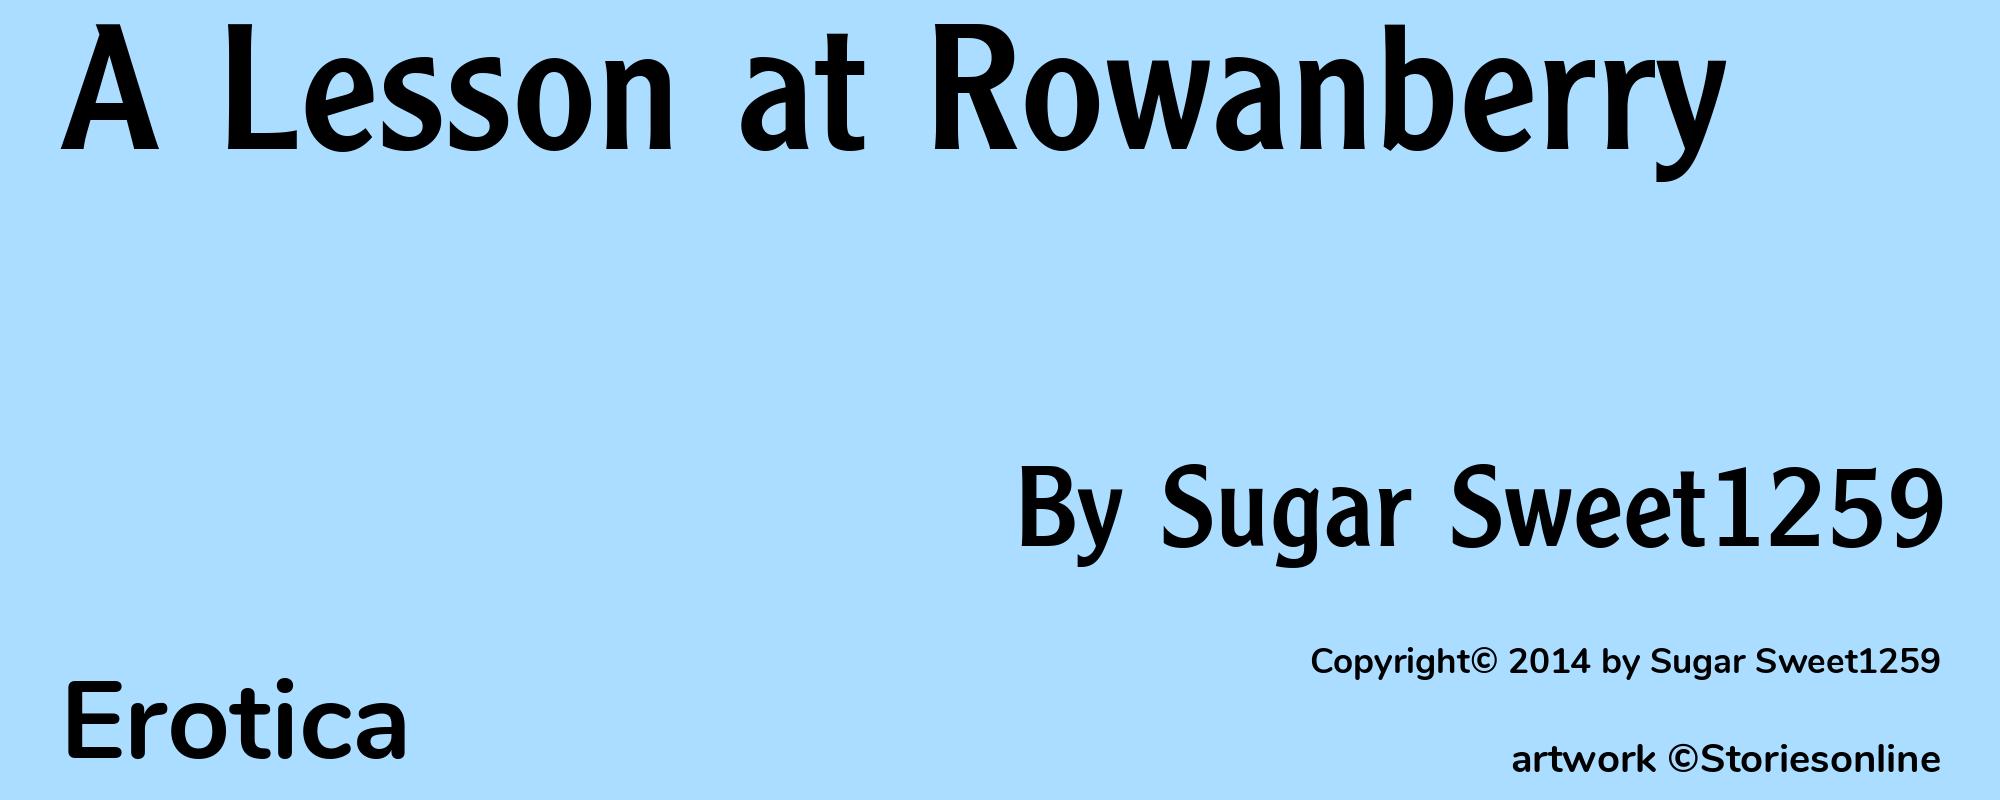 A Lesson at Rowanberry - Cover